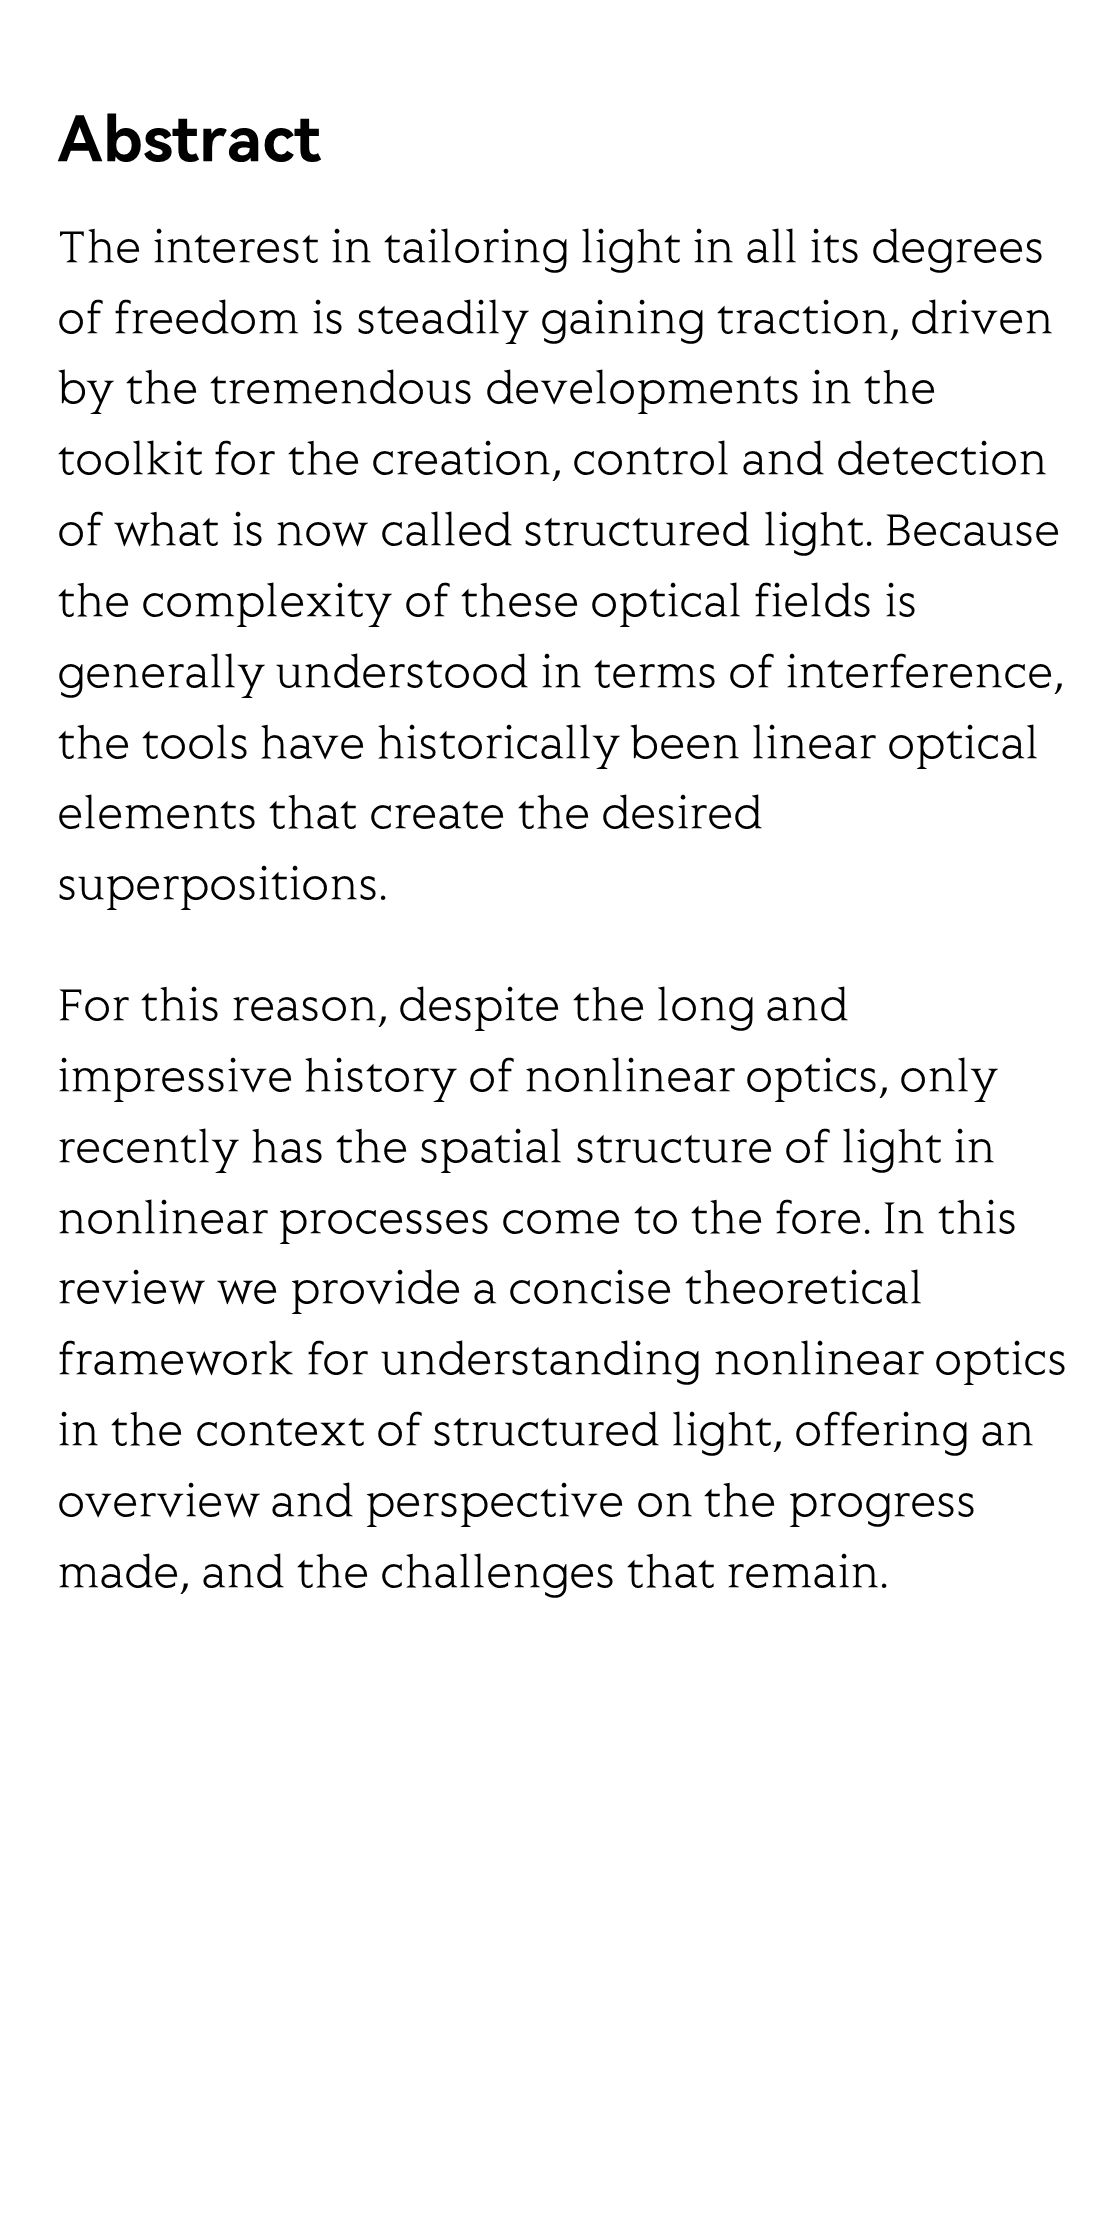 Nonlinear optics with structured light_2